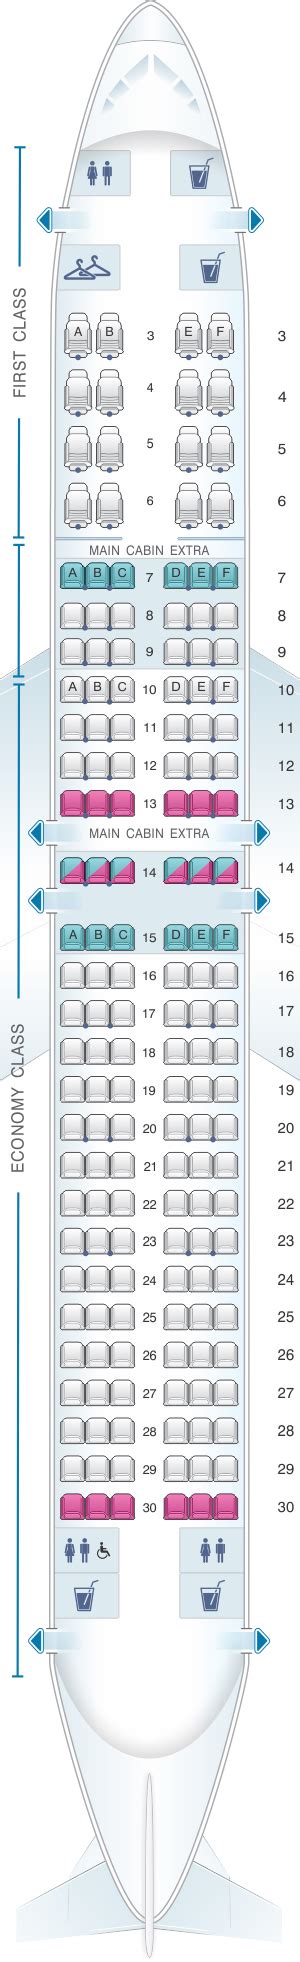 American airlines seat map 737-800. Find the best seat wiht our United Boeing 737-800 (738) v1 seating chart. Use this seat map to get the most comfortable seats, legroom and recline before booking. ... 2 to 6 hour flight, 30 minutes longer than flying on a widebody like Hawaiian's Boeing 767. United isn't alone- Alaska, American, Southwest and Delta all conspire to wedge ... 